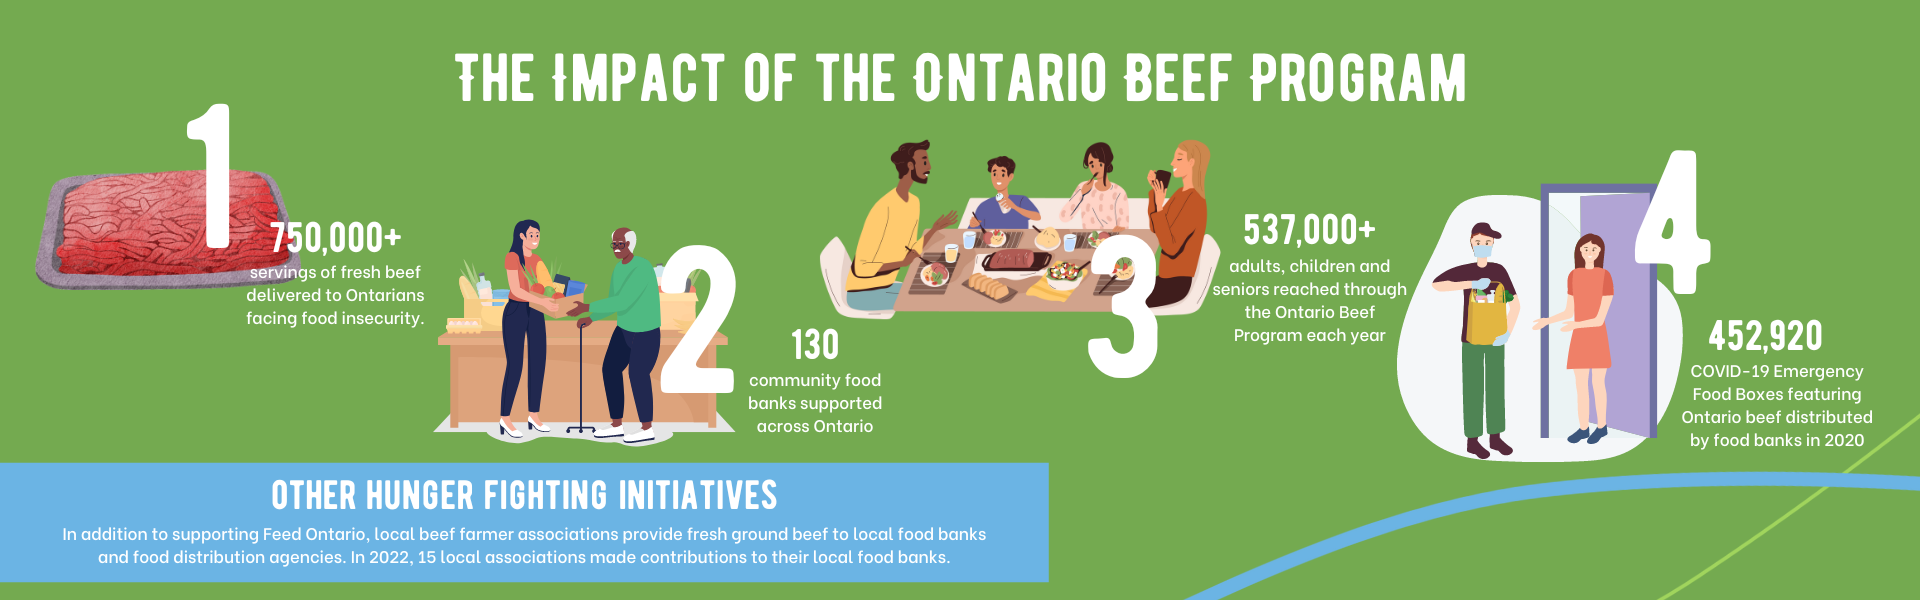 Ontario Beef Program Stats from Feed Ontario